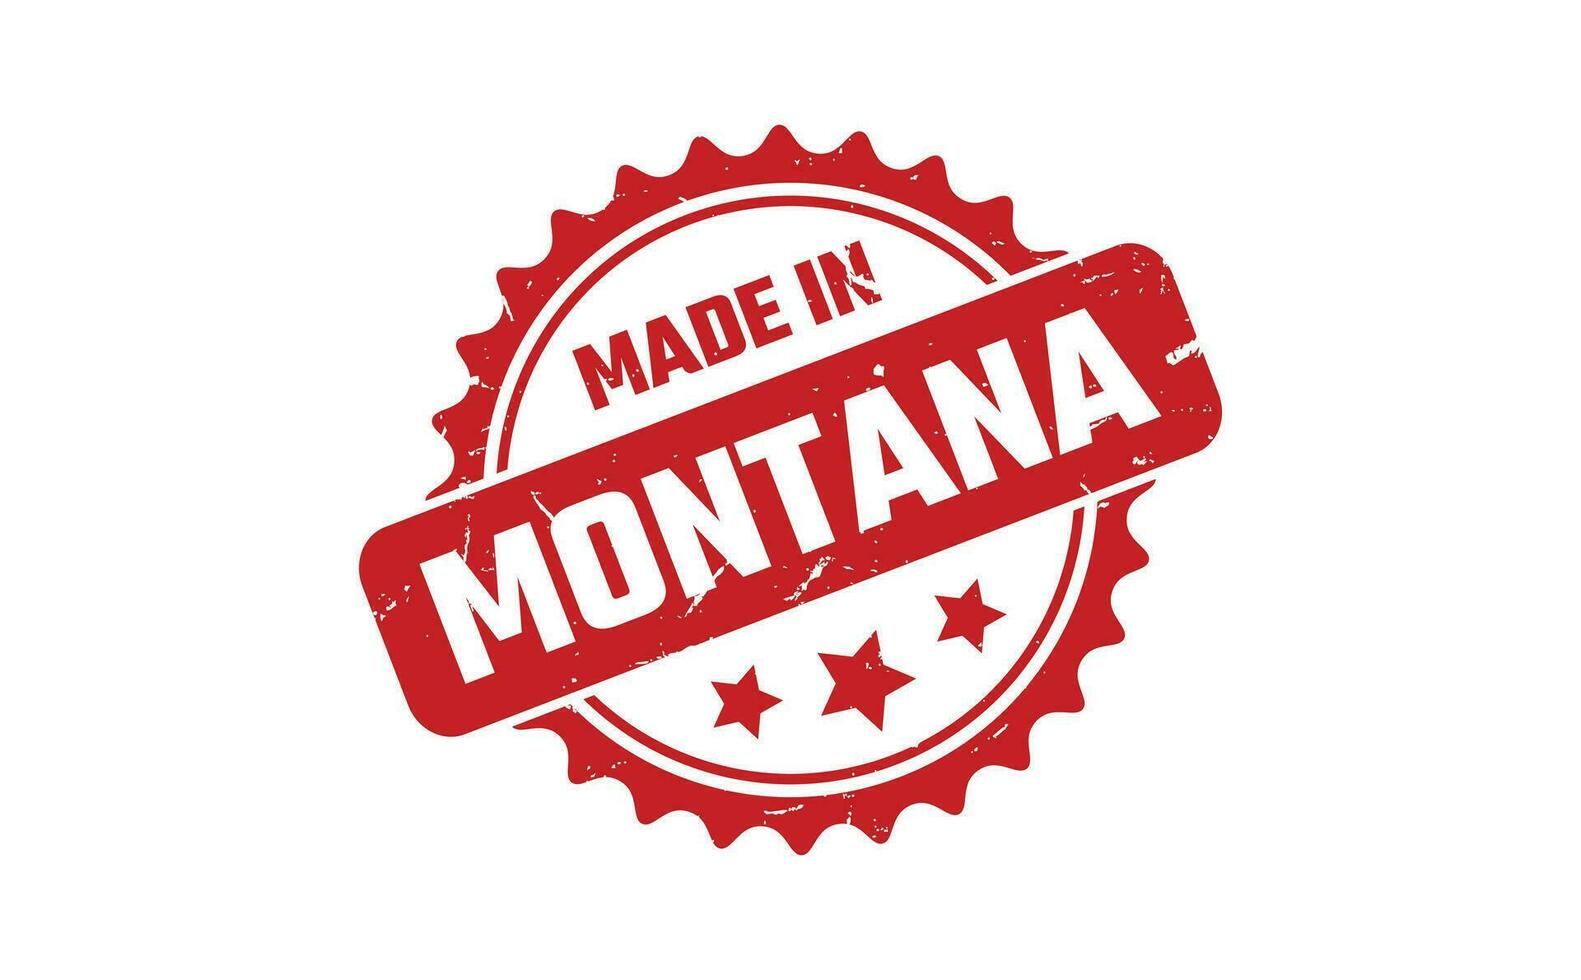 Made In Montana Rubber Stamp vector